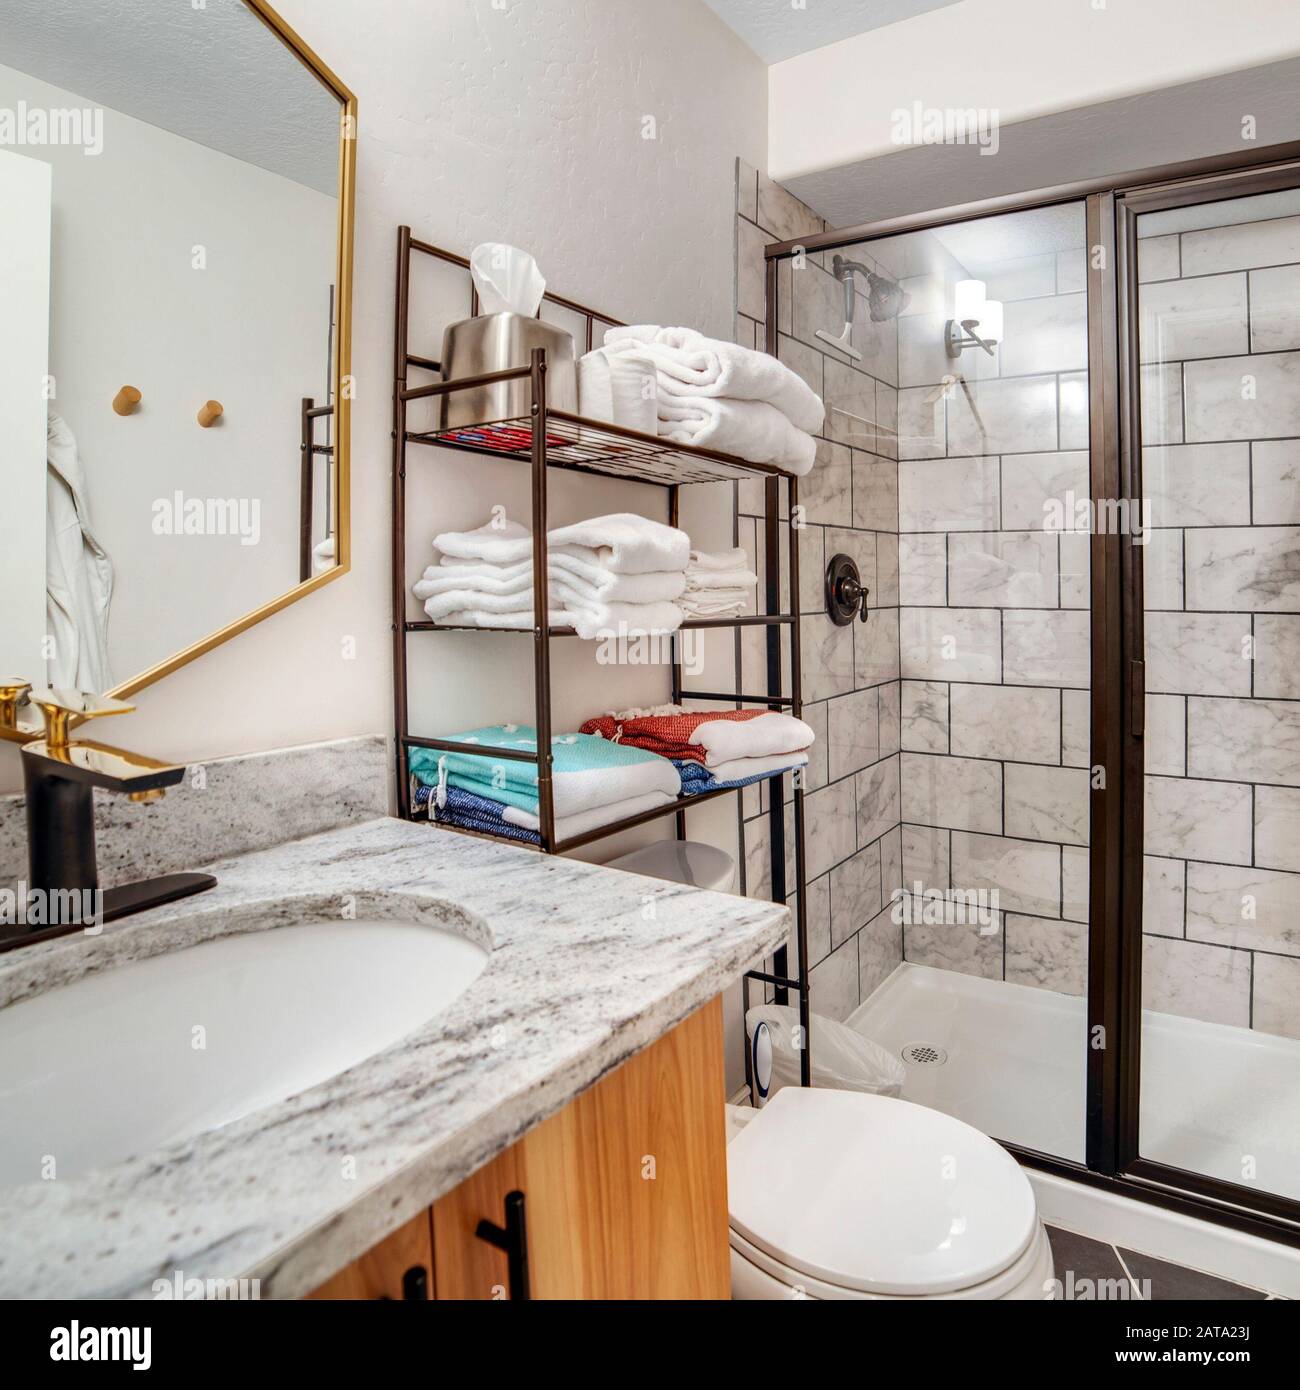 Square Bathroom Interior With Black And White Tile Wall And Marble